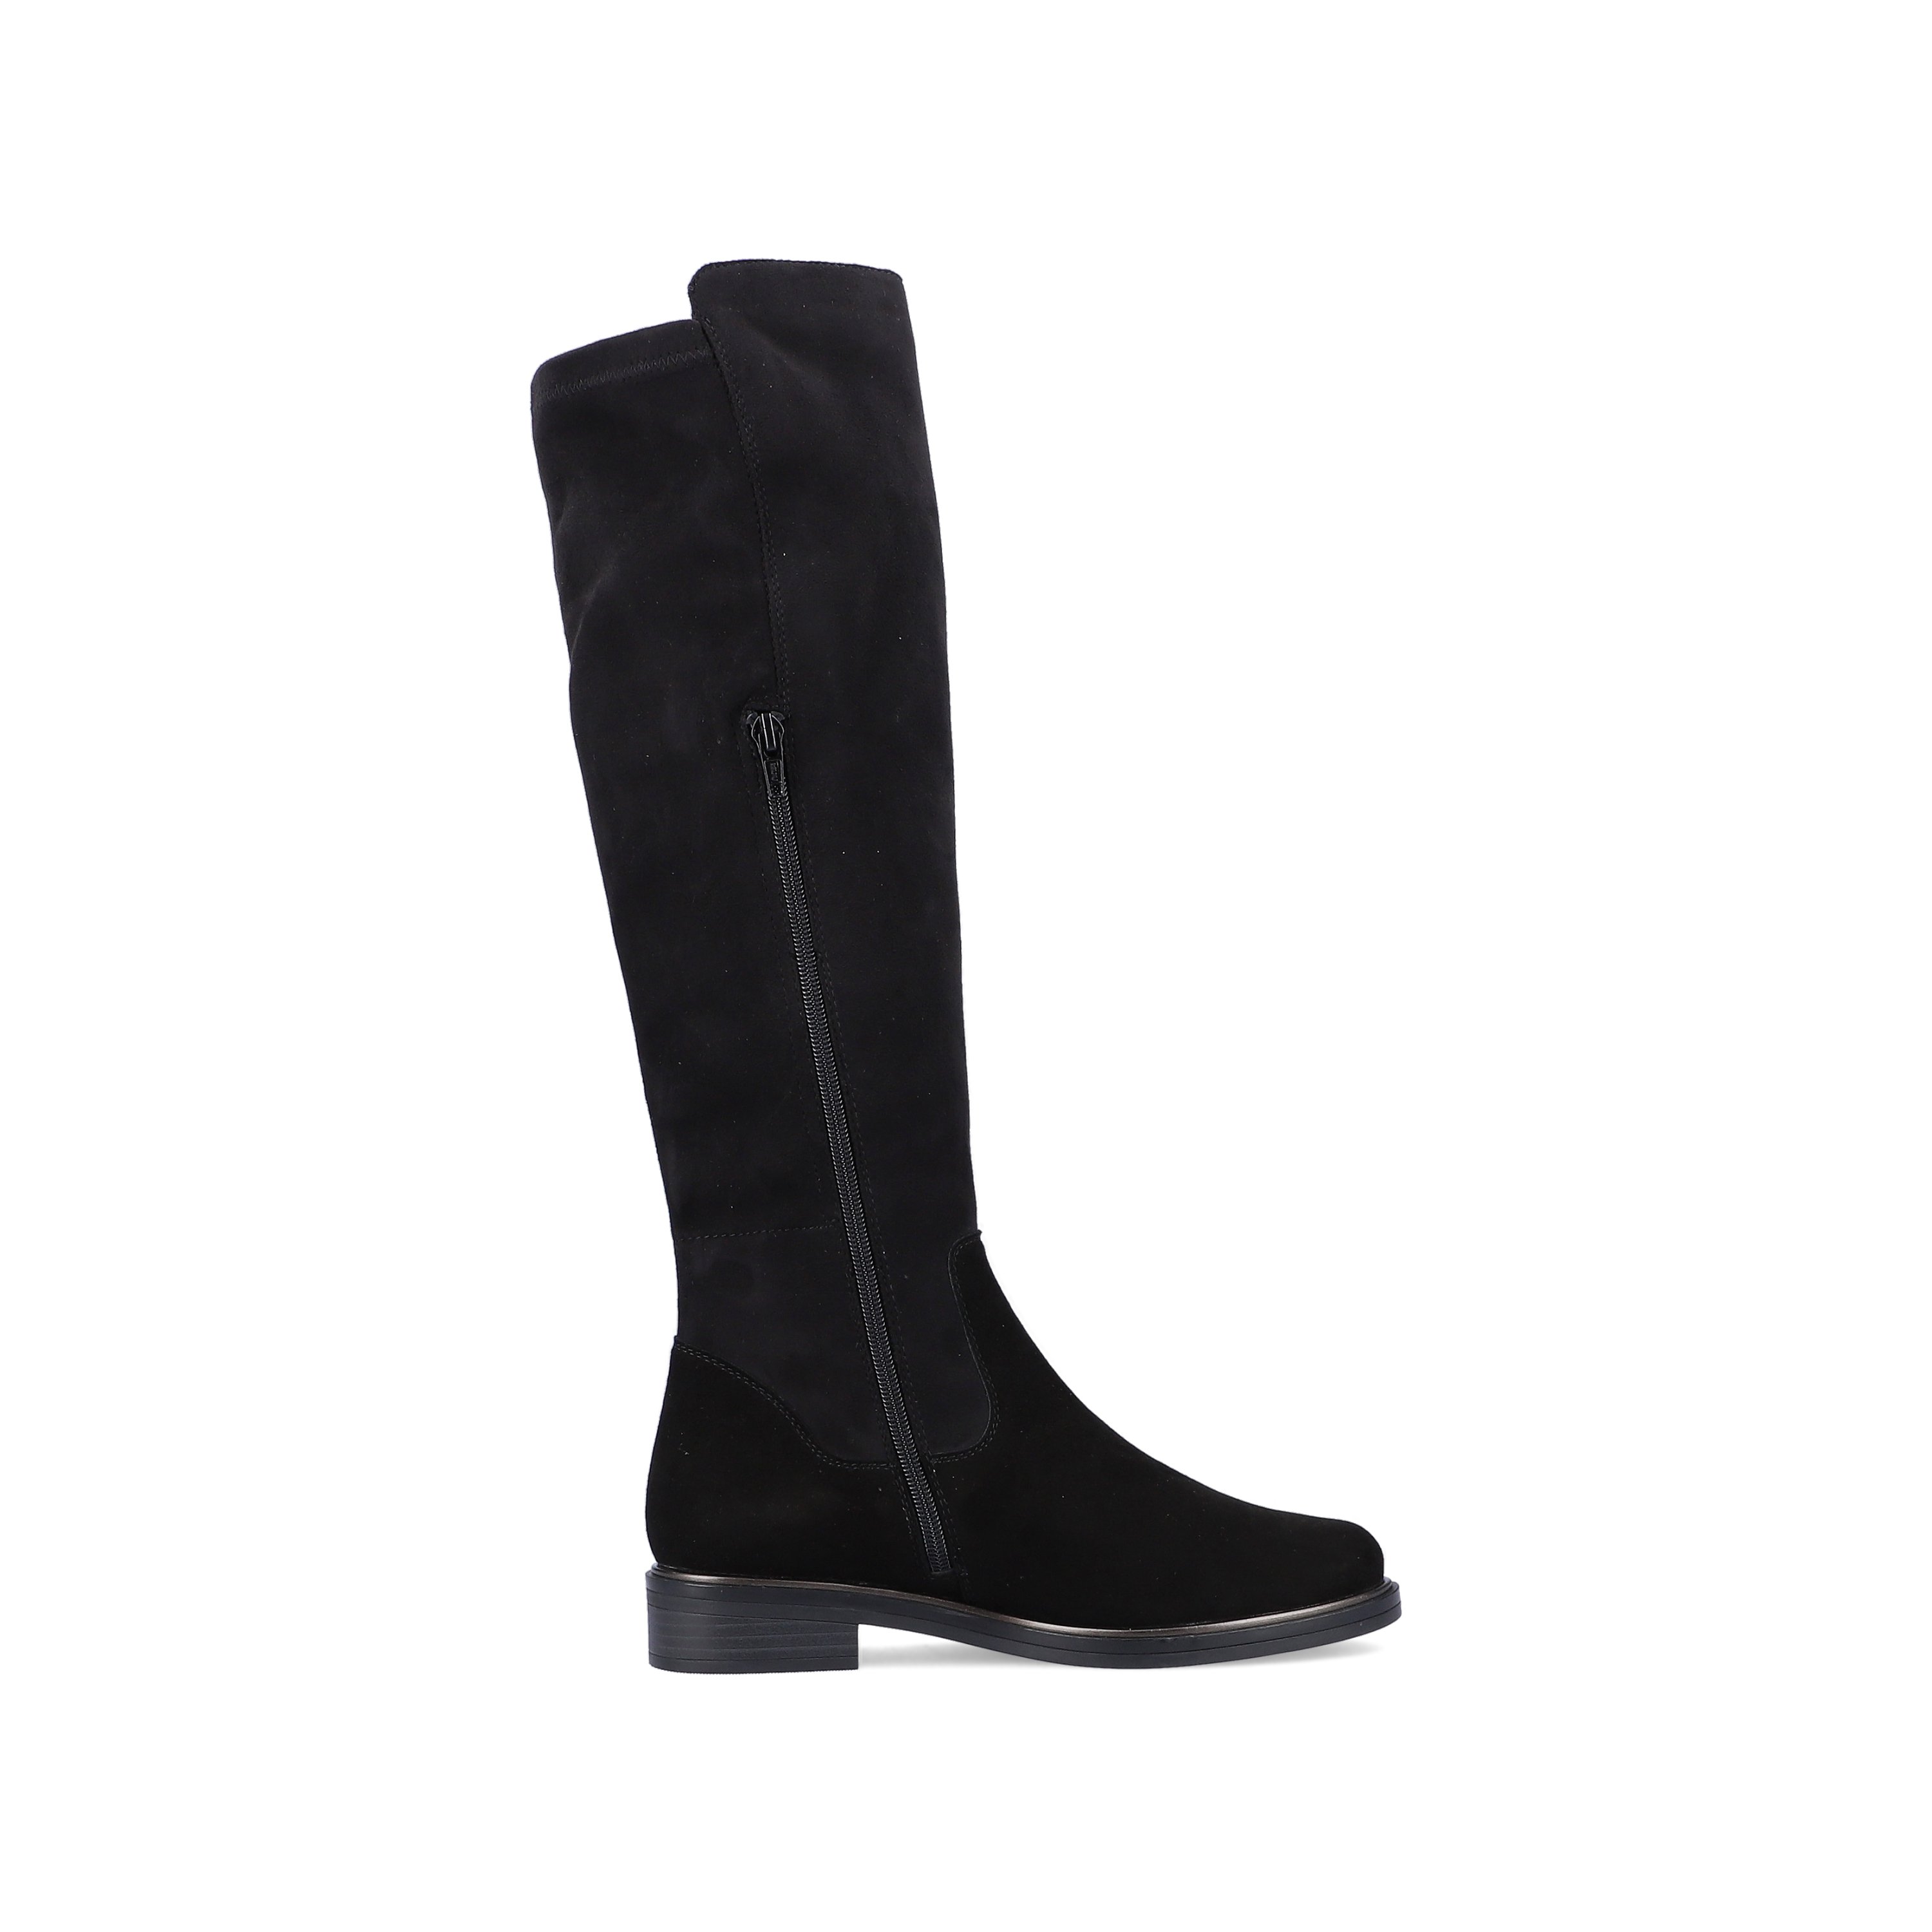 Jet black remonte women´s high boots D8387-02 with cushioning profile sole. Shoe inside